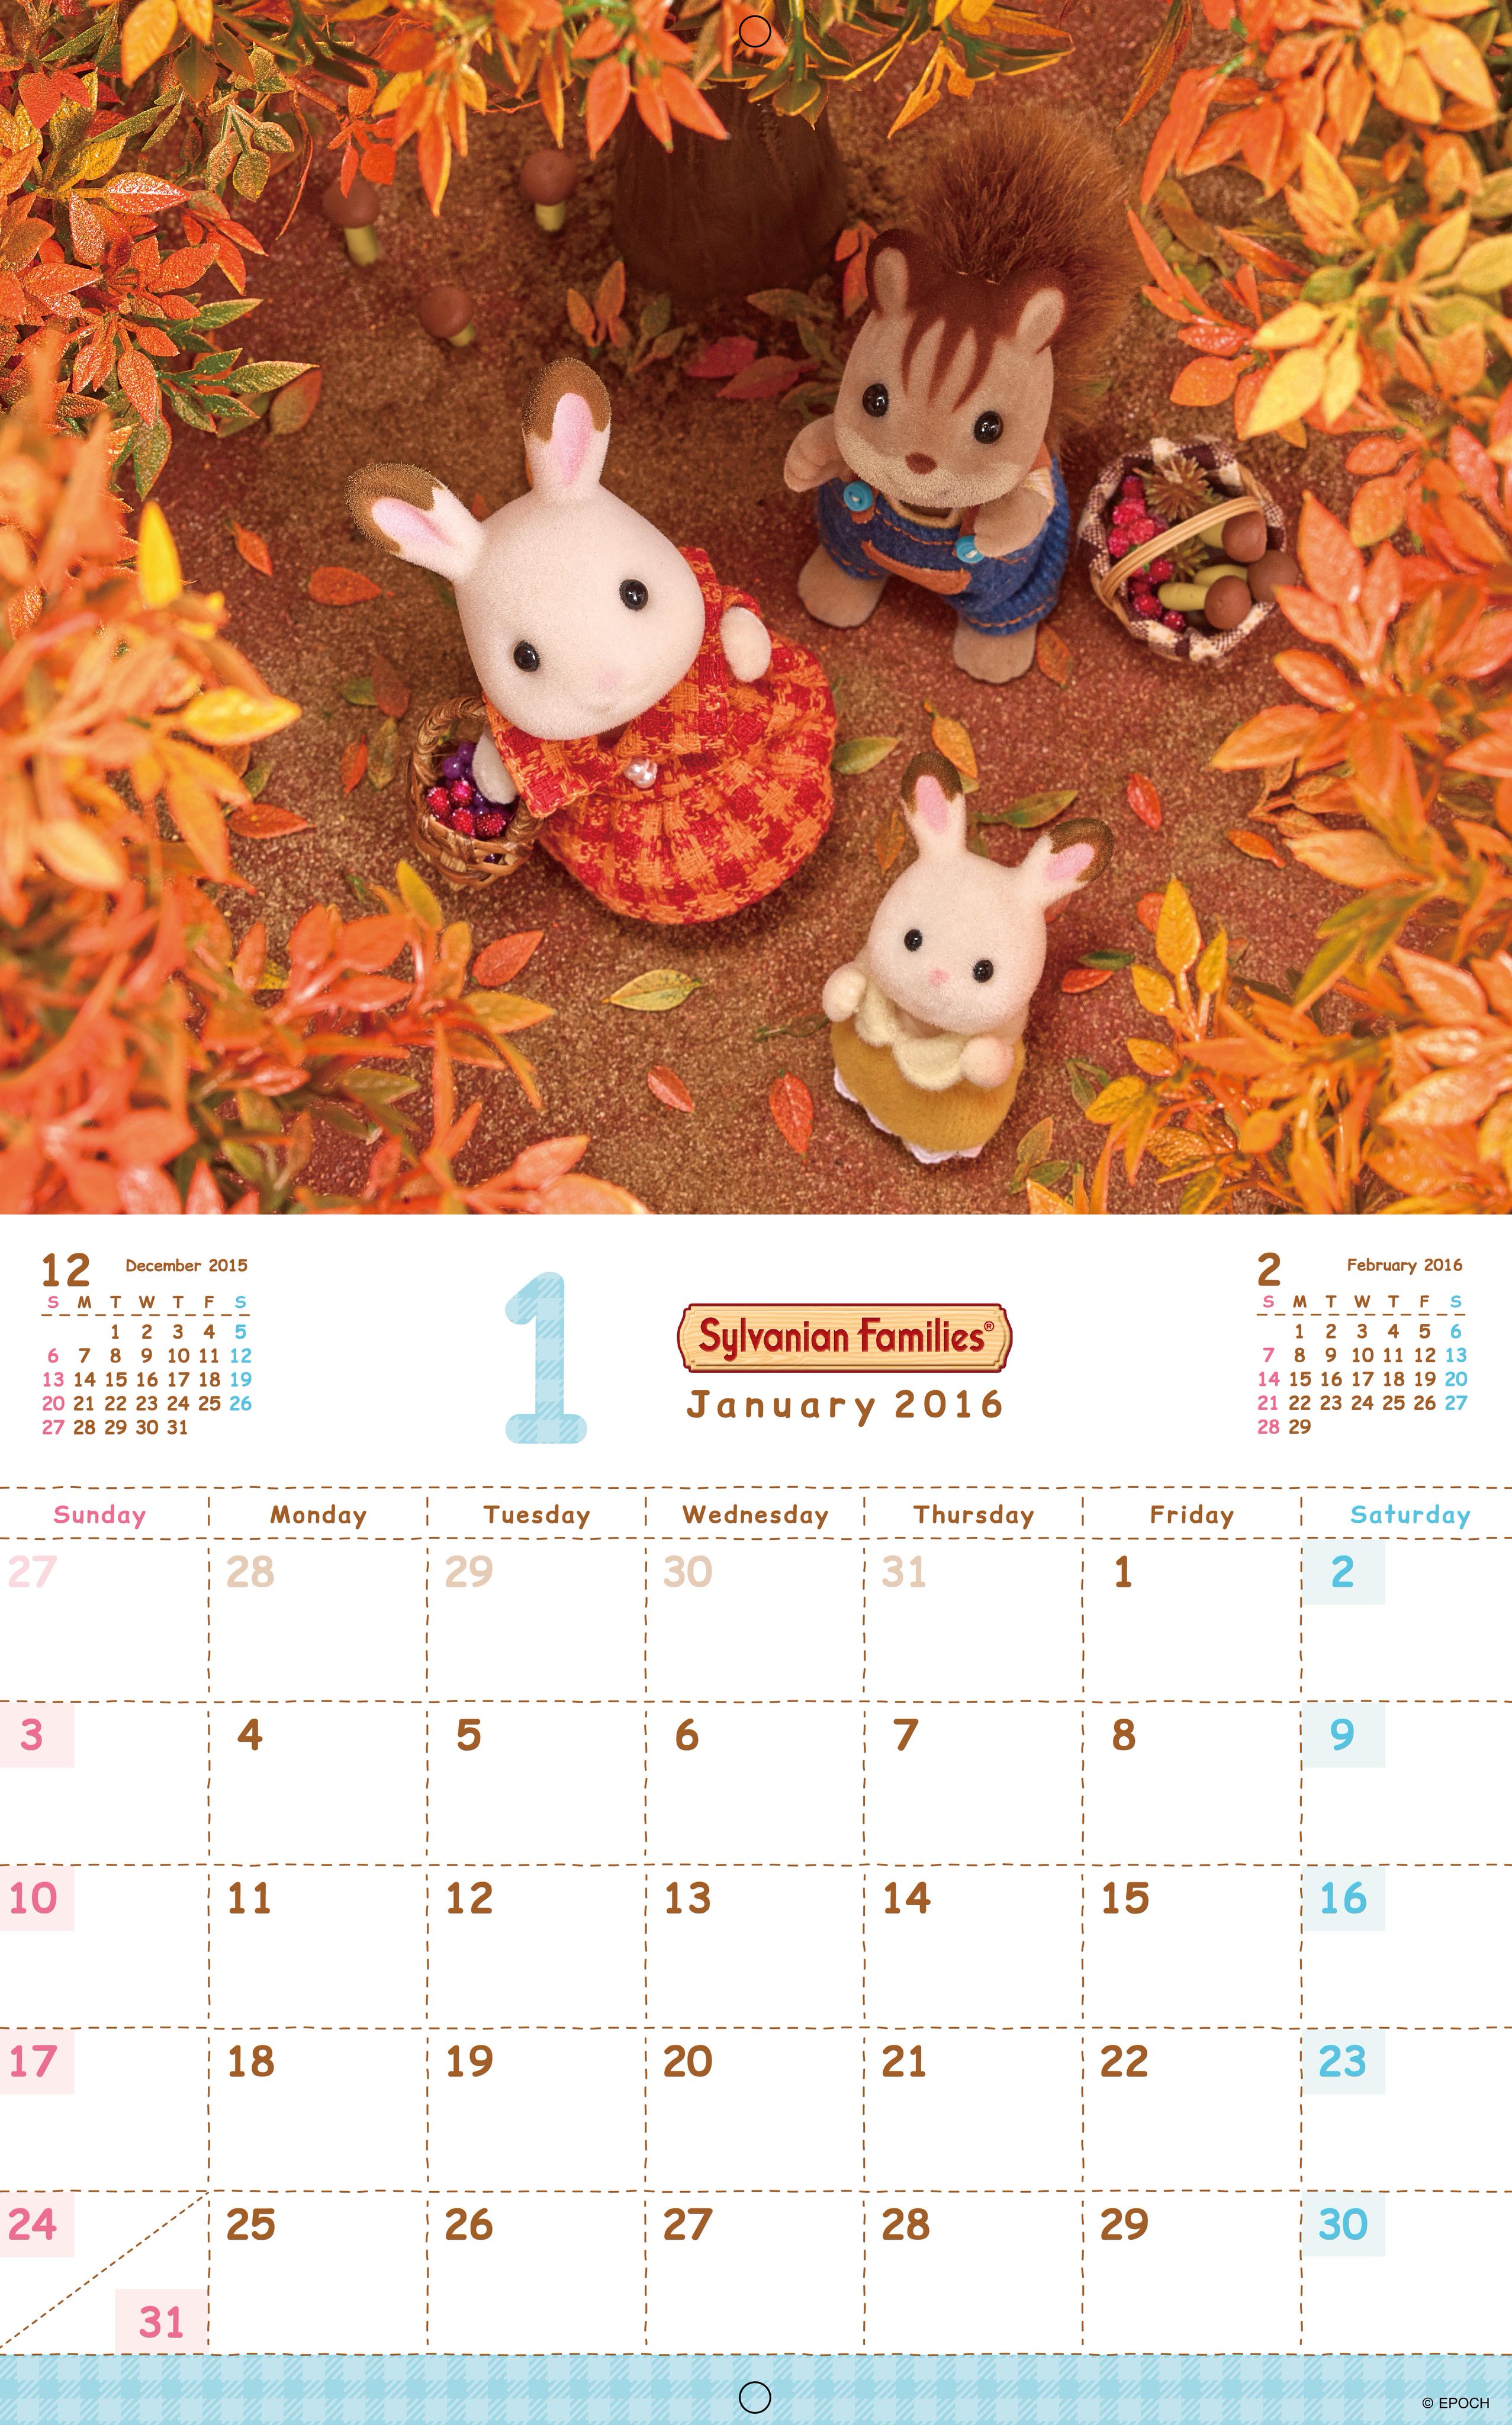 Sylvanian Families We Re Giving Away 10 Sylvanian Families 16 Calendars Rt For A Chance To Win T Cs T Co 4ole1vpcp5 T Co Ghrwrlnrae Twitter